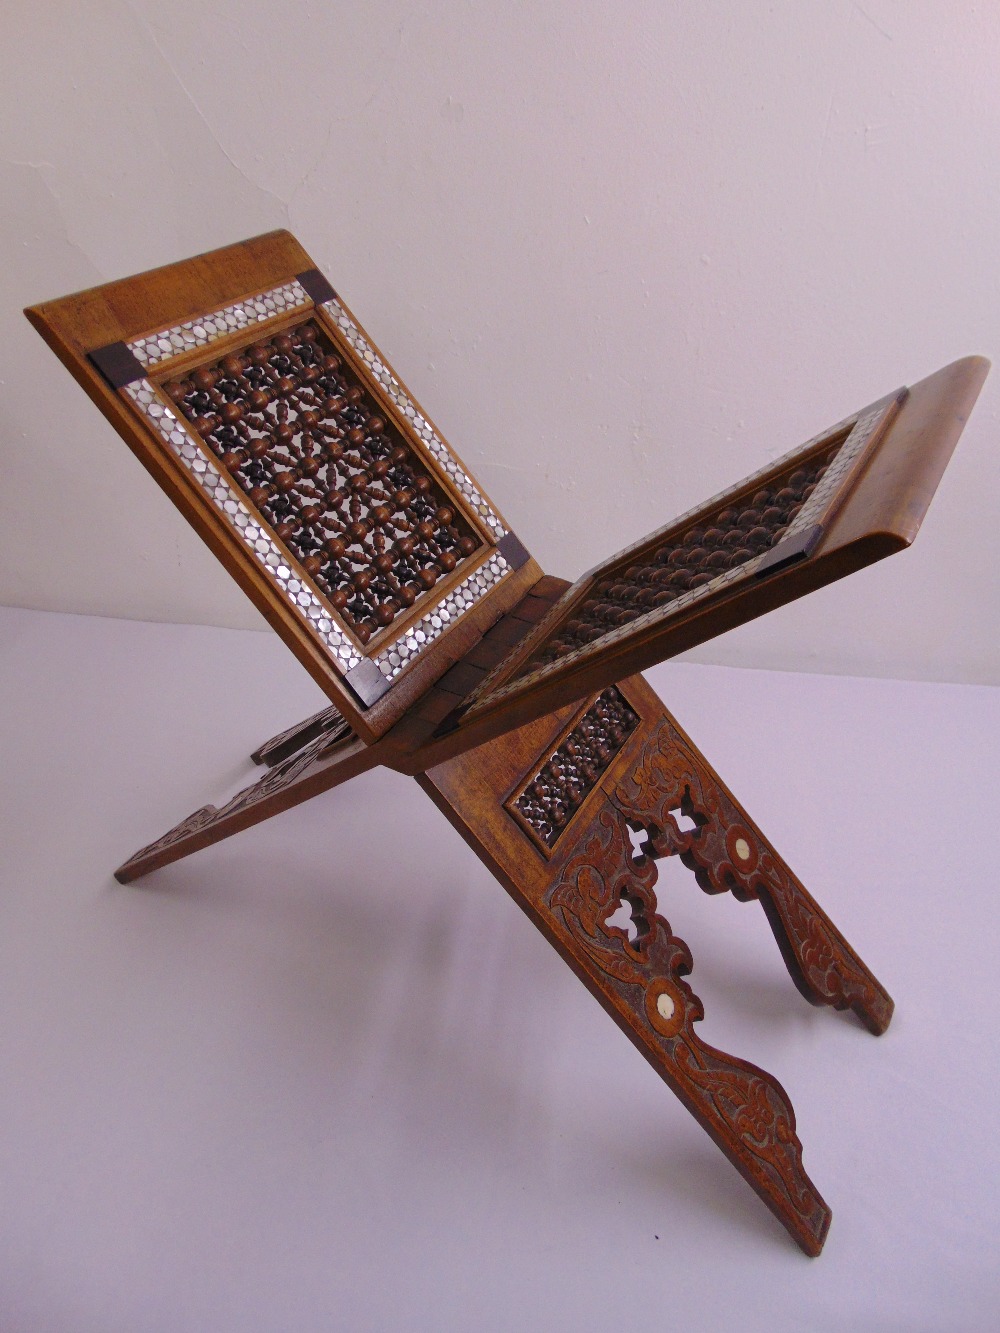 A 19th century Ottoman mahogany Koran stand with carved and pierced decoration and inlaid mother